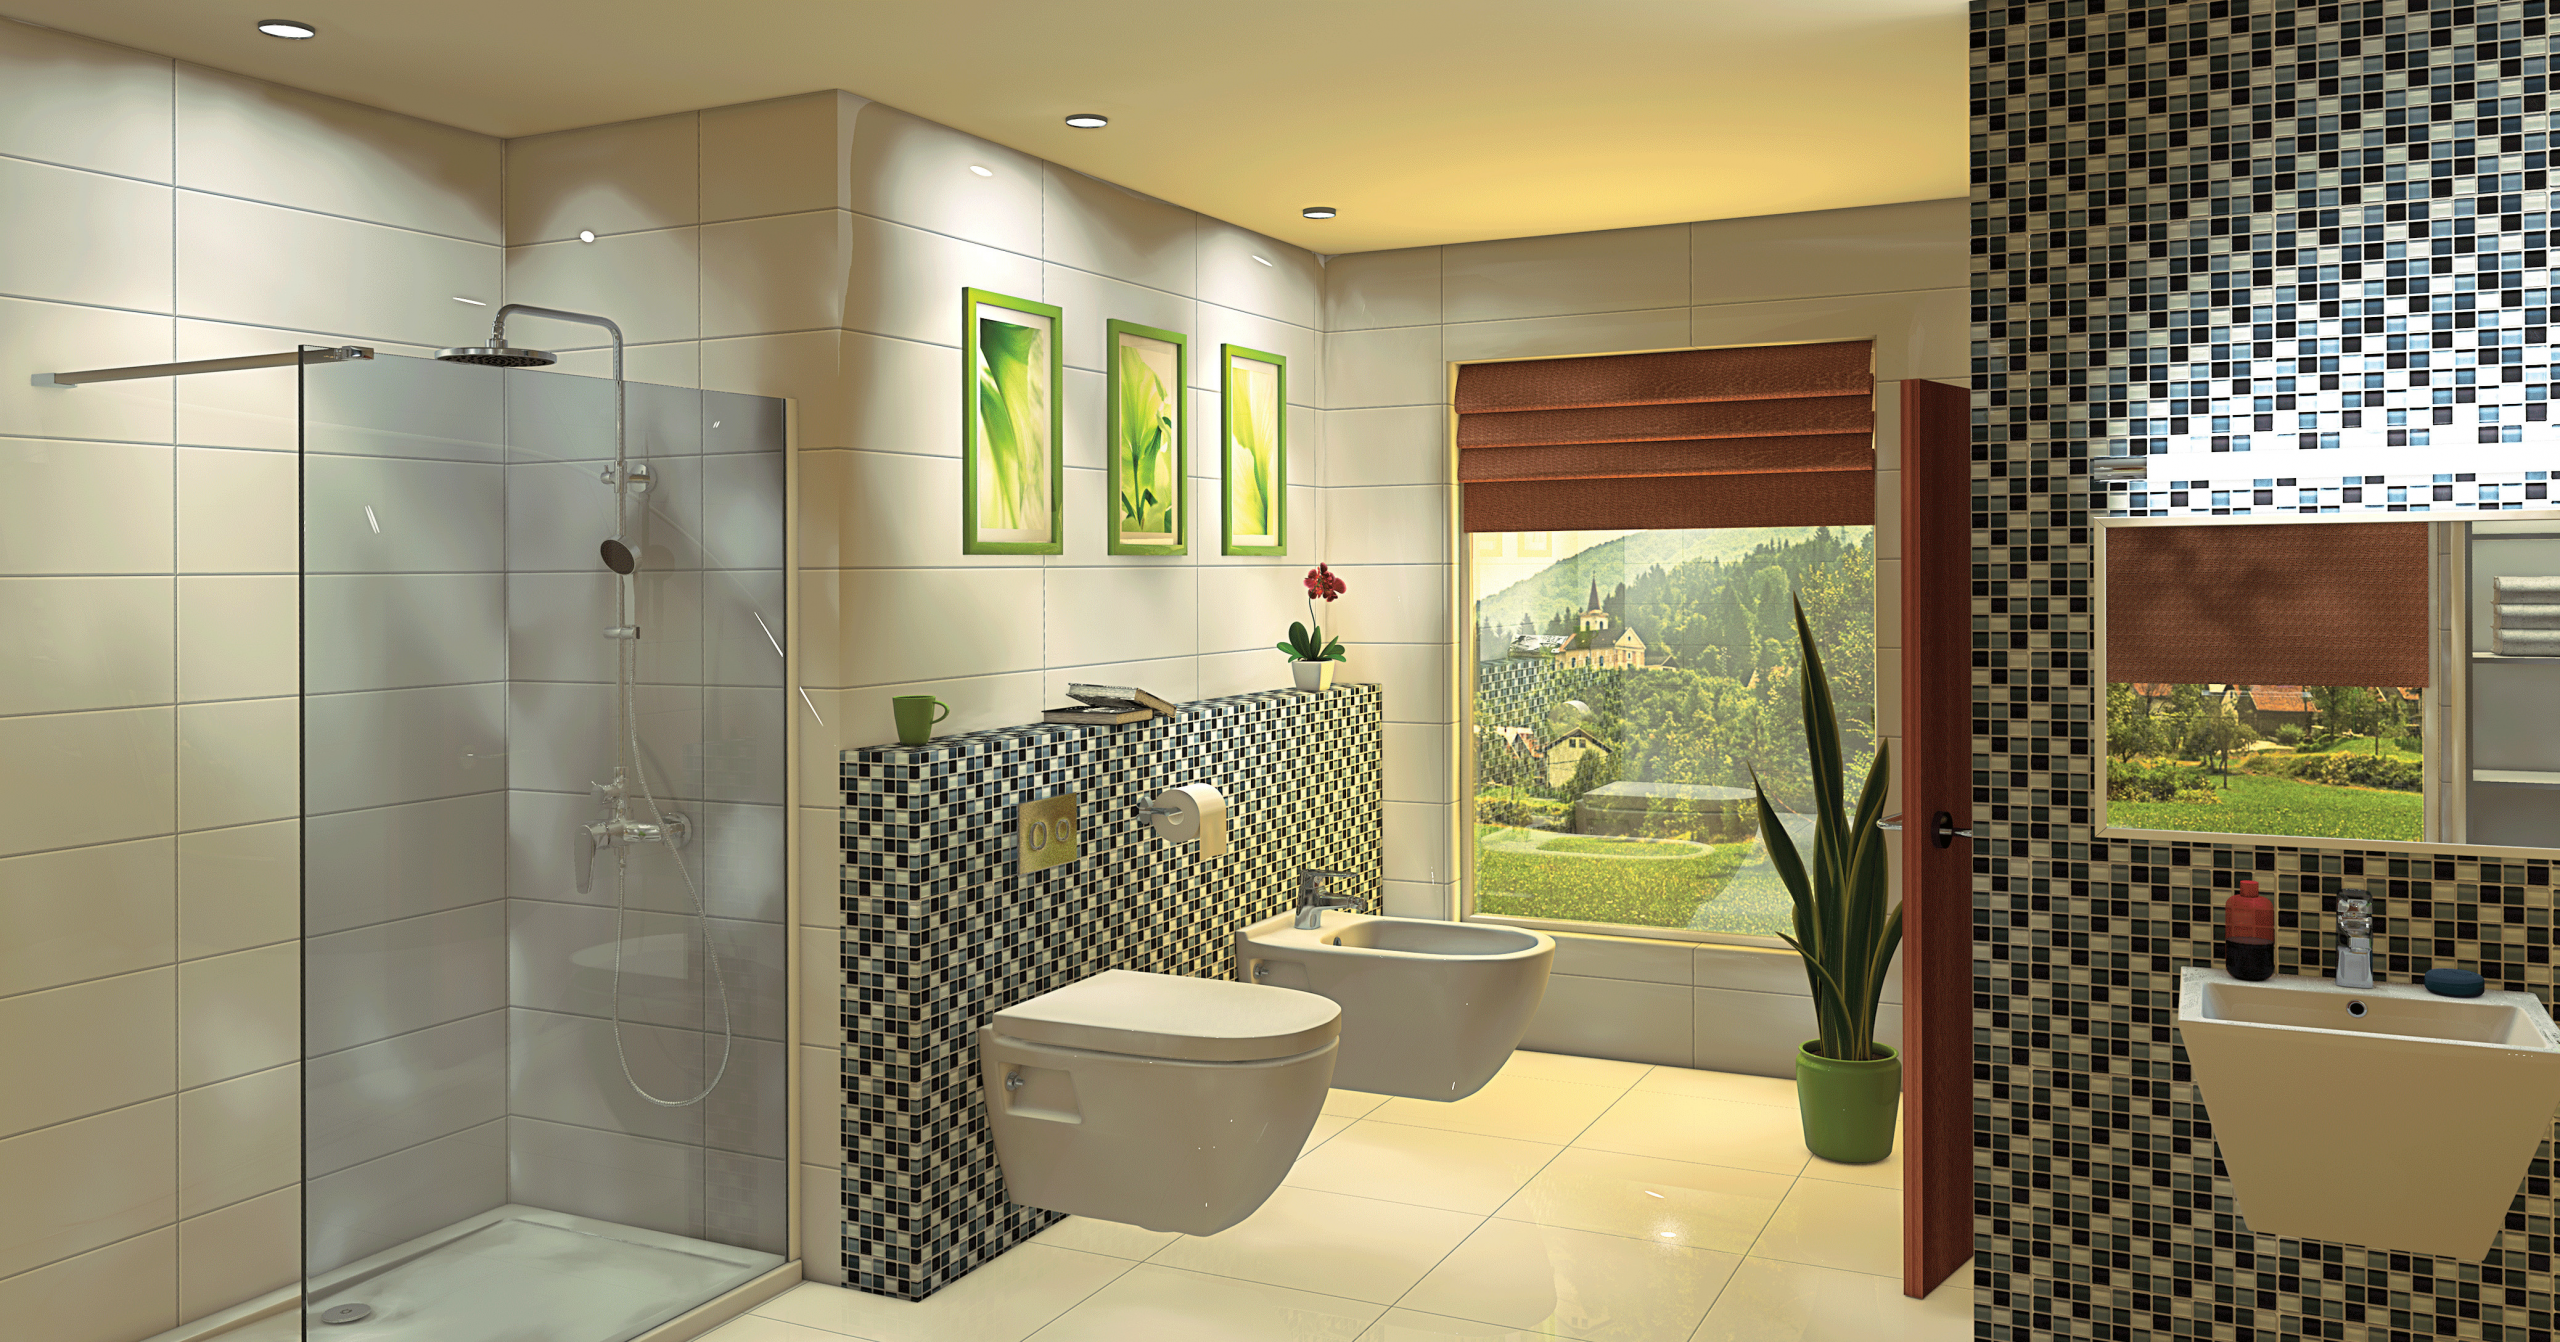 Latest Bathroom Design
 5 Latest Bathroom Design Trends to Look Out For